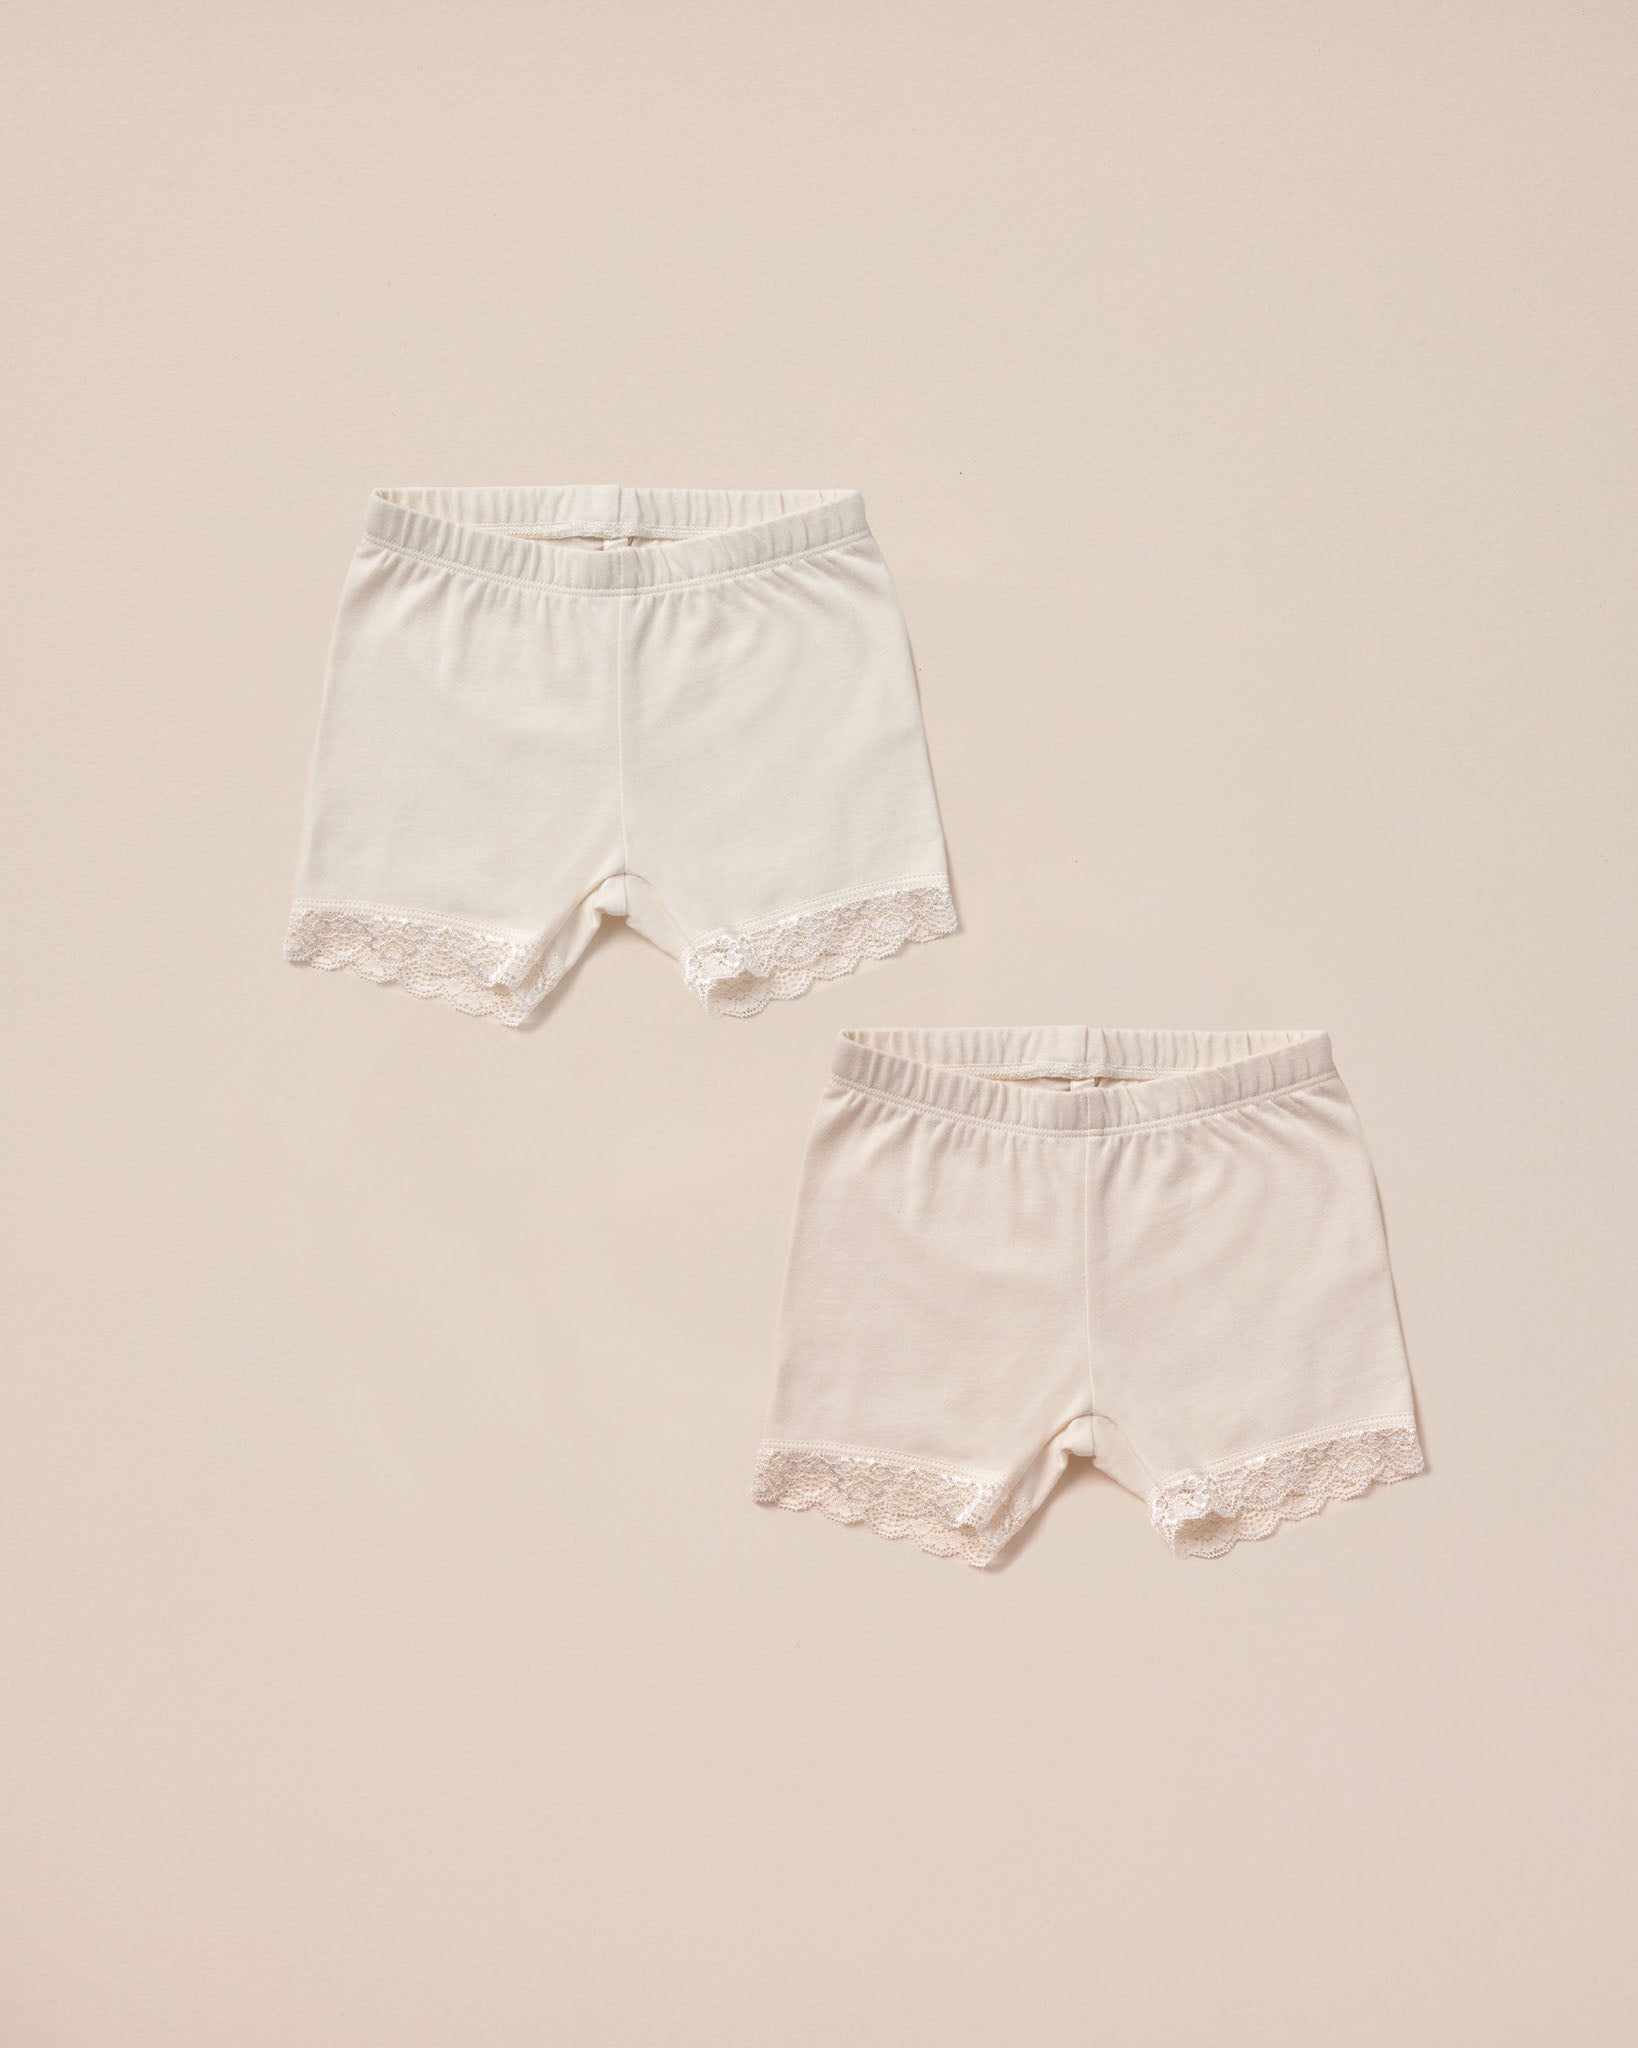 Cartwheel Shorts || Ivory + Natural - Rylee + Cru | Kids Clothes | Trendy Baby Clothes | Modern Infant Outfits |